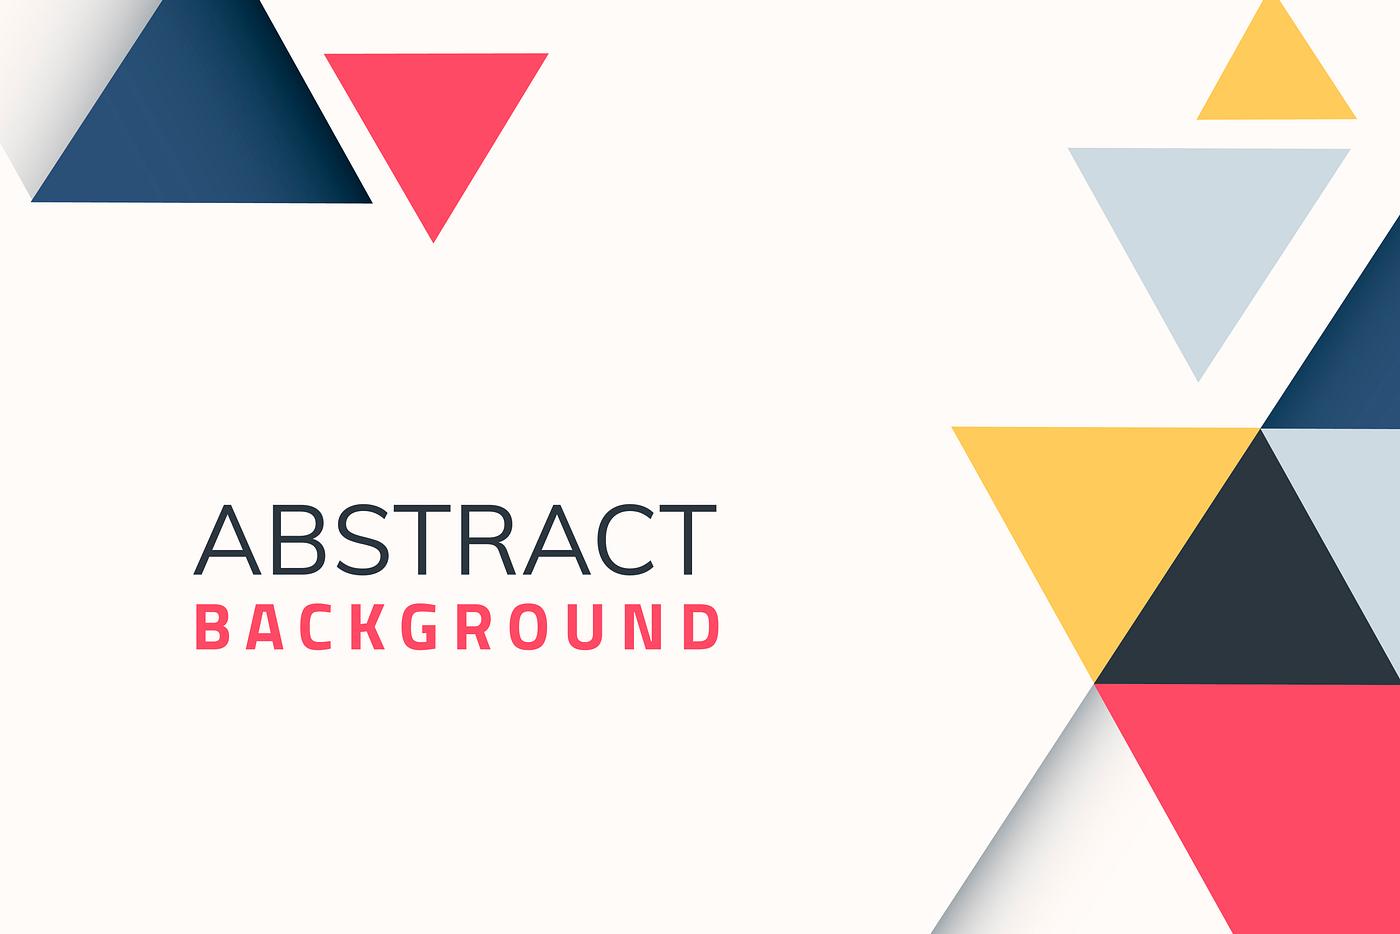 Geometrical abstract background | Free stock vector - 591596